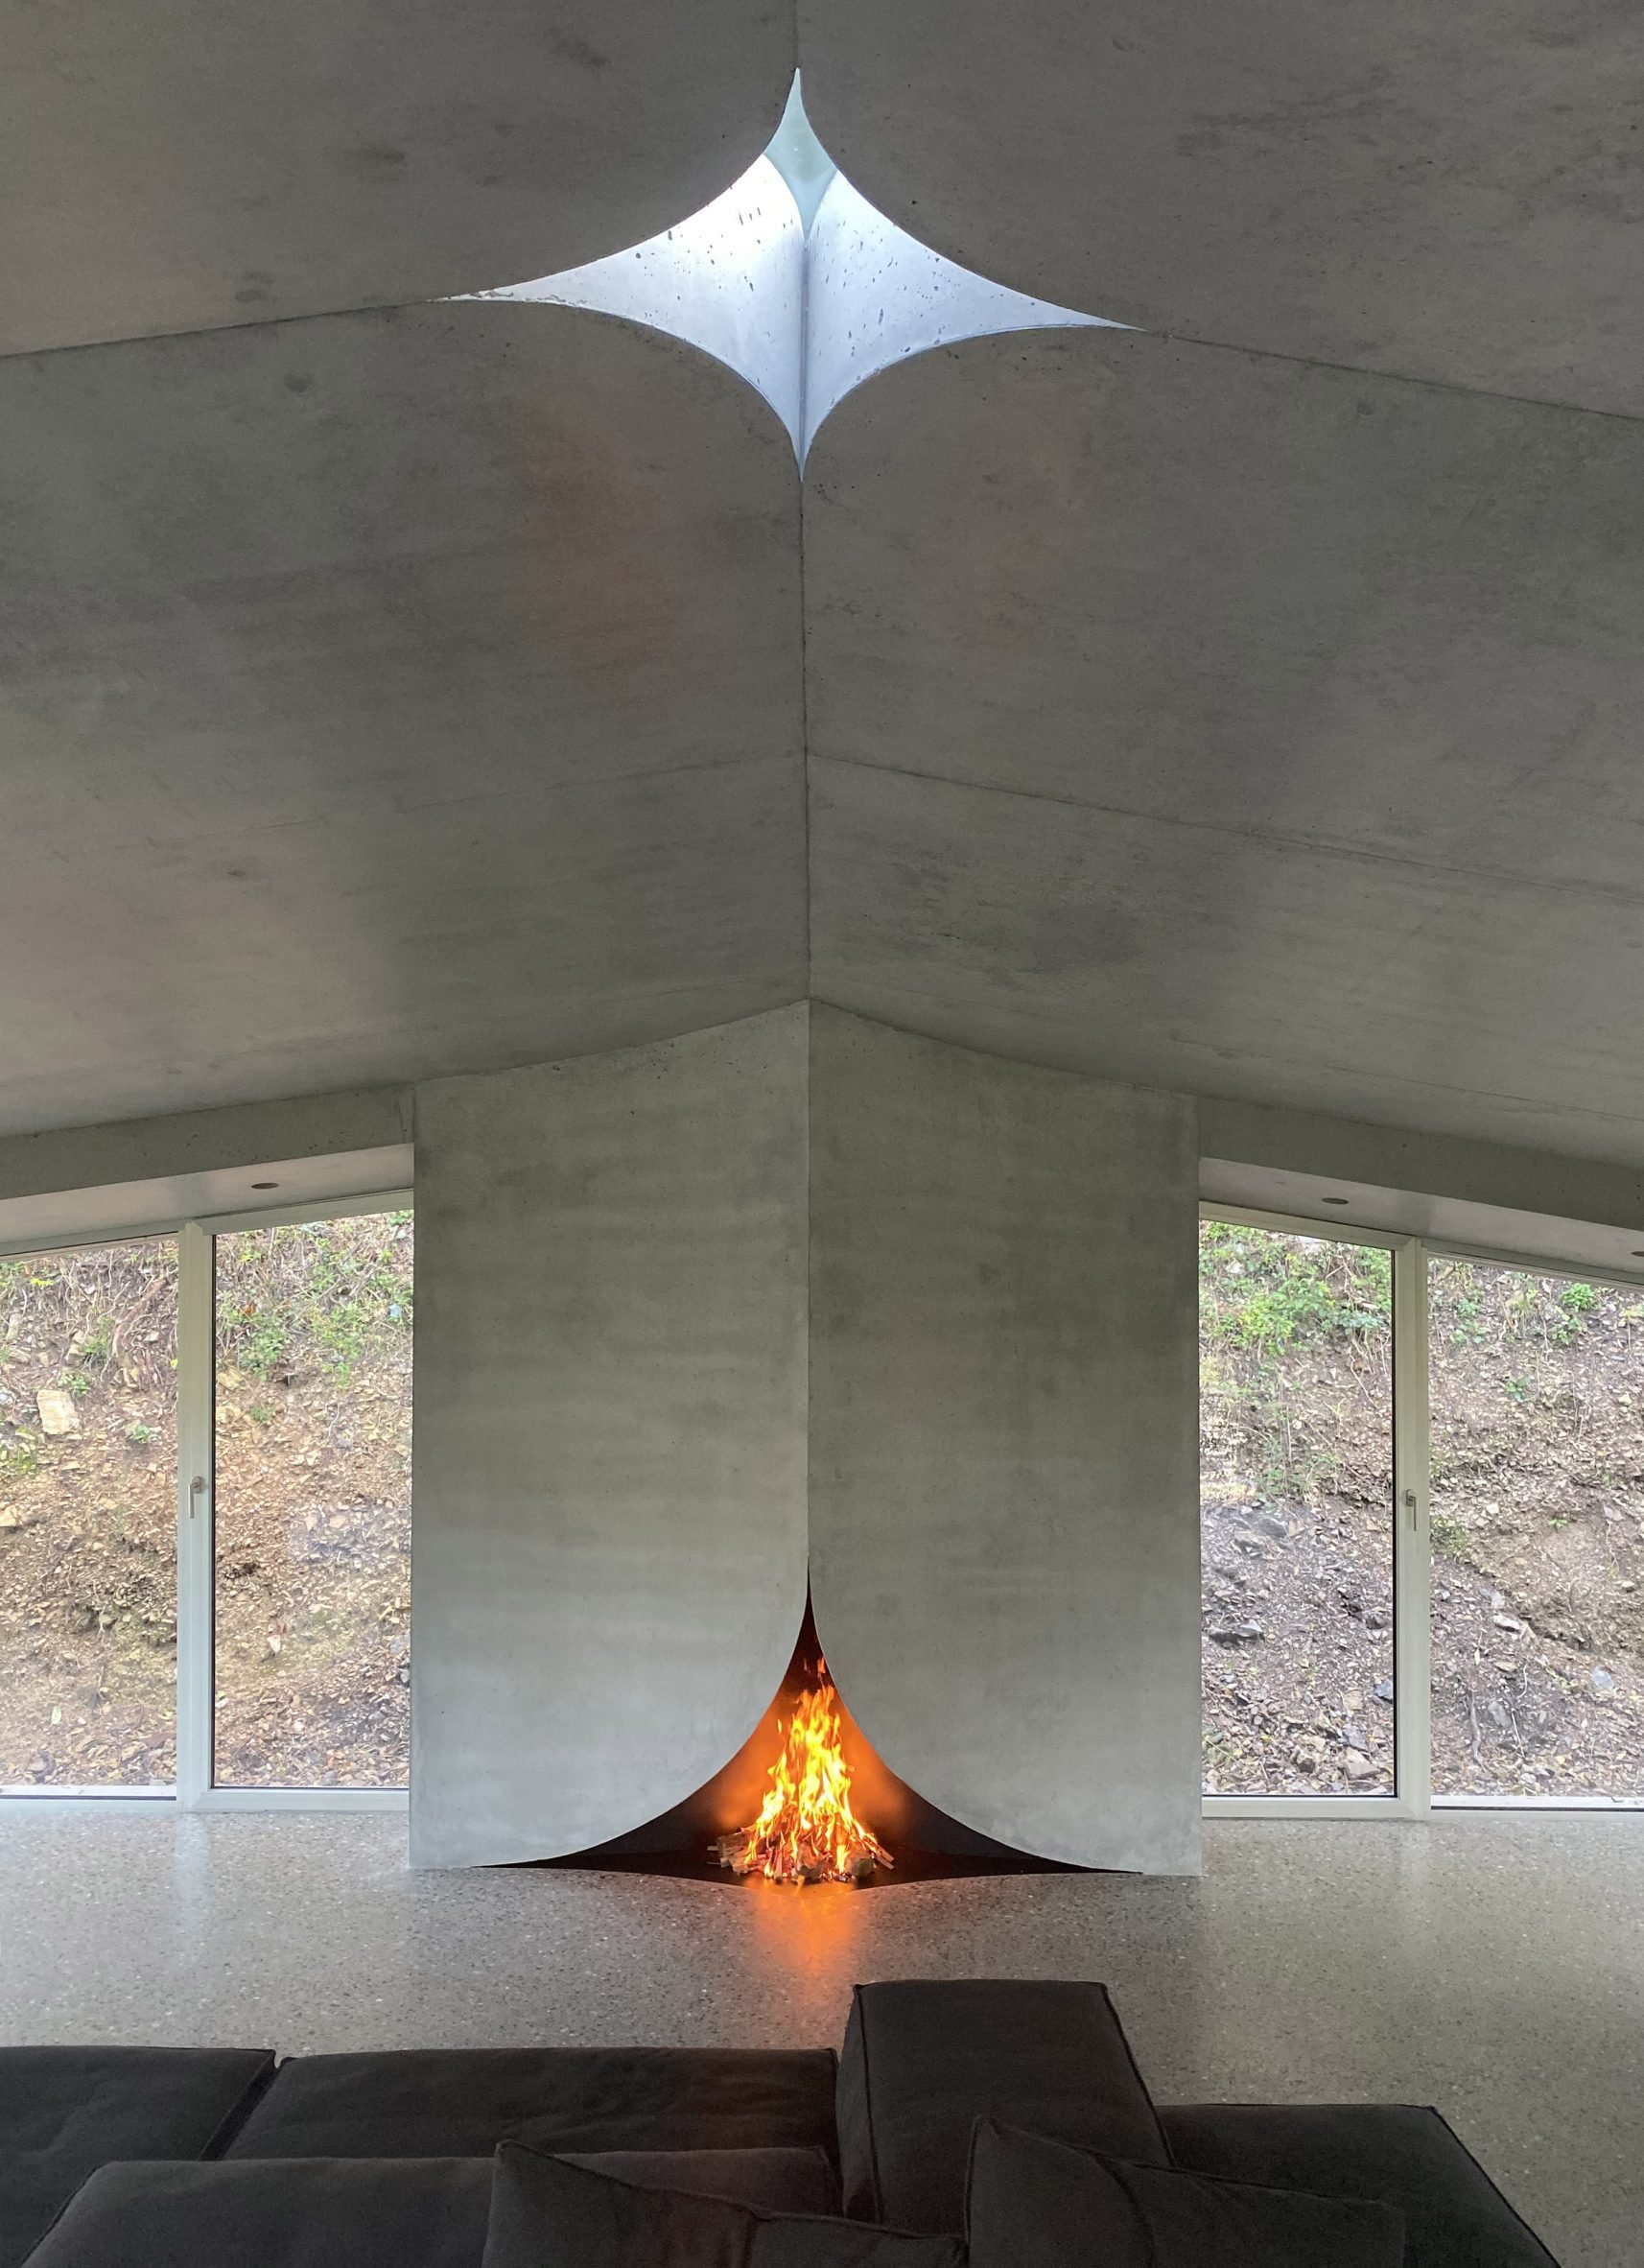 Concrete home interior with a fireplace